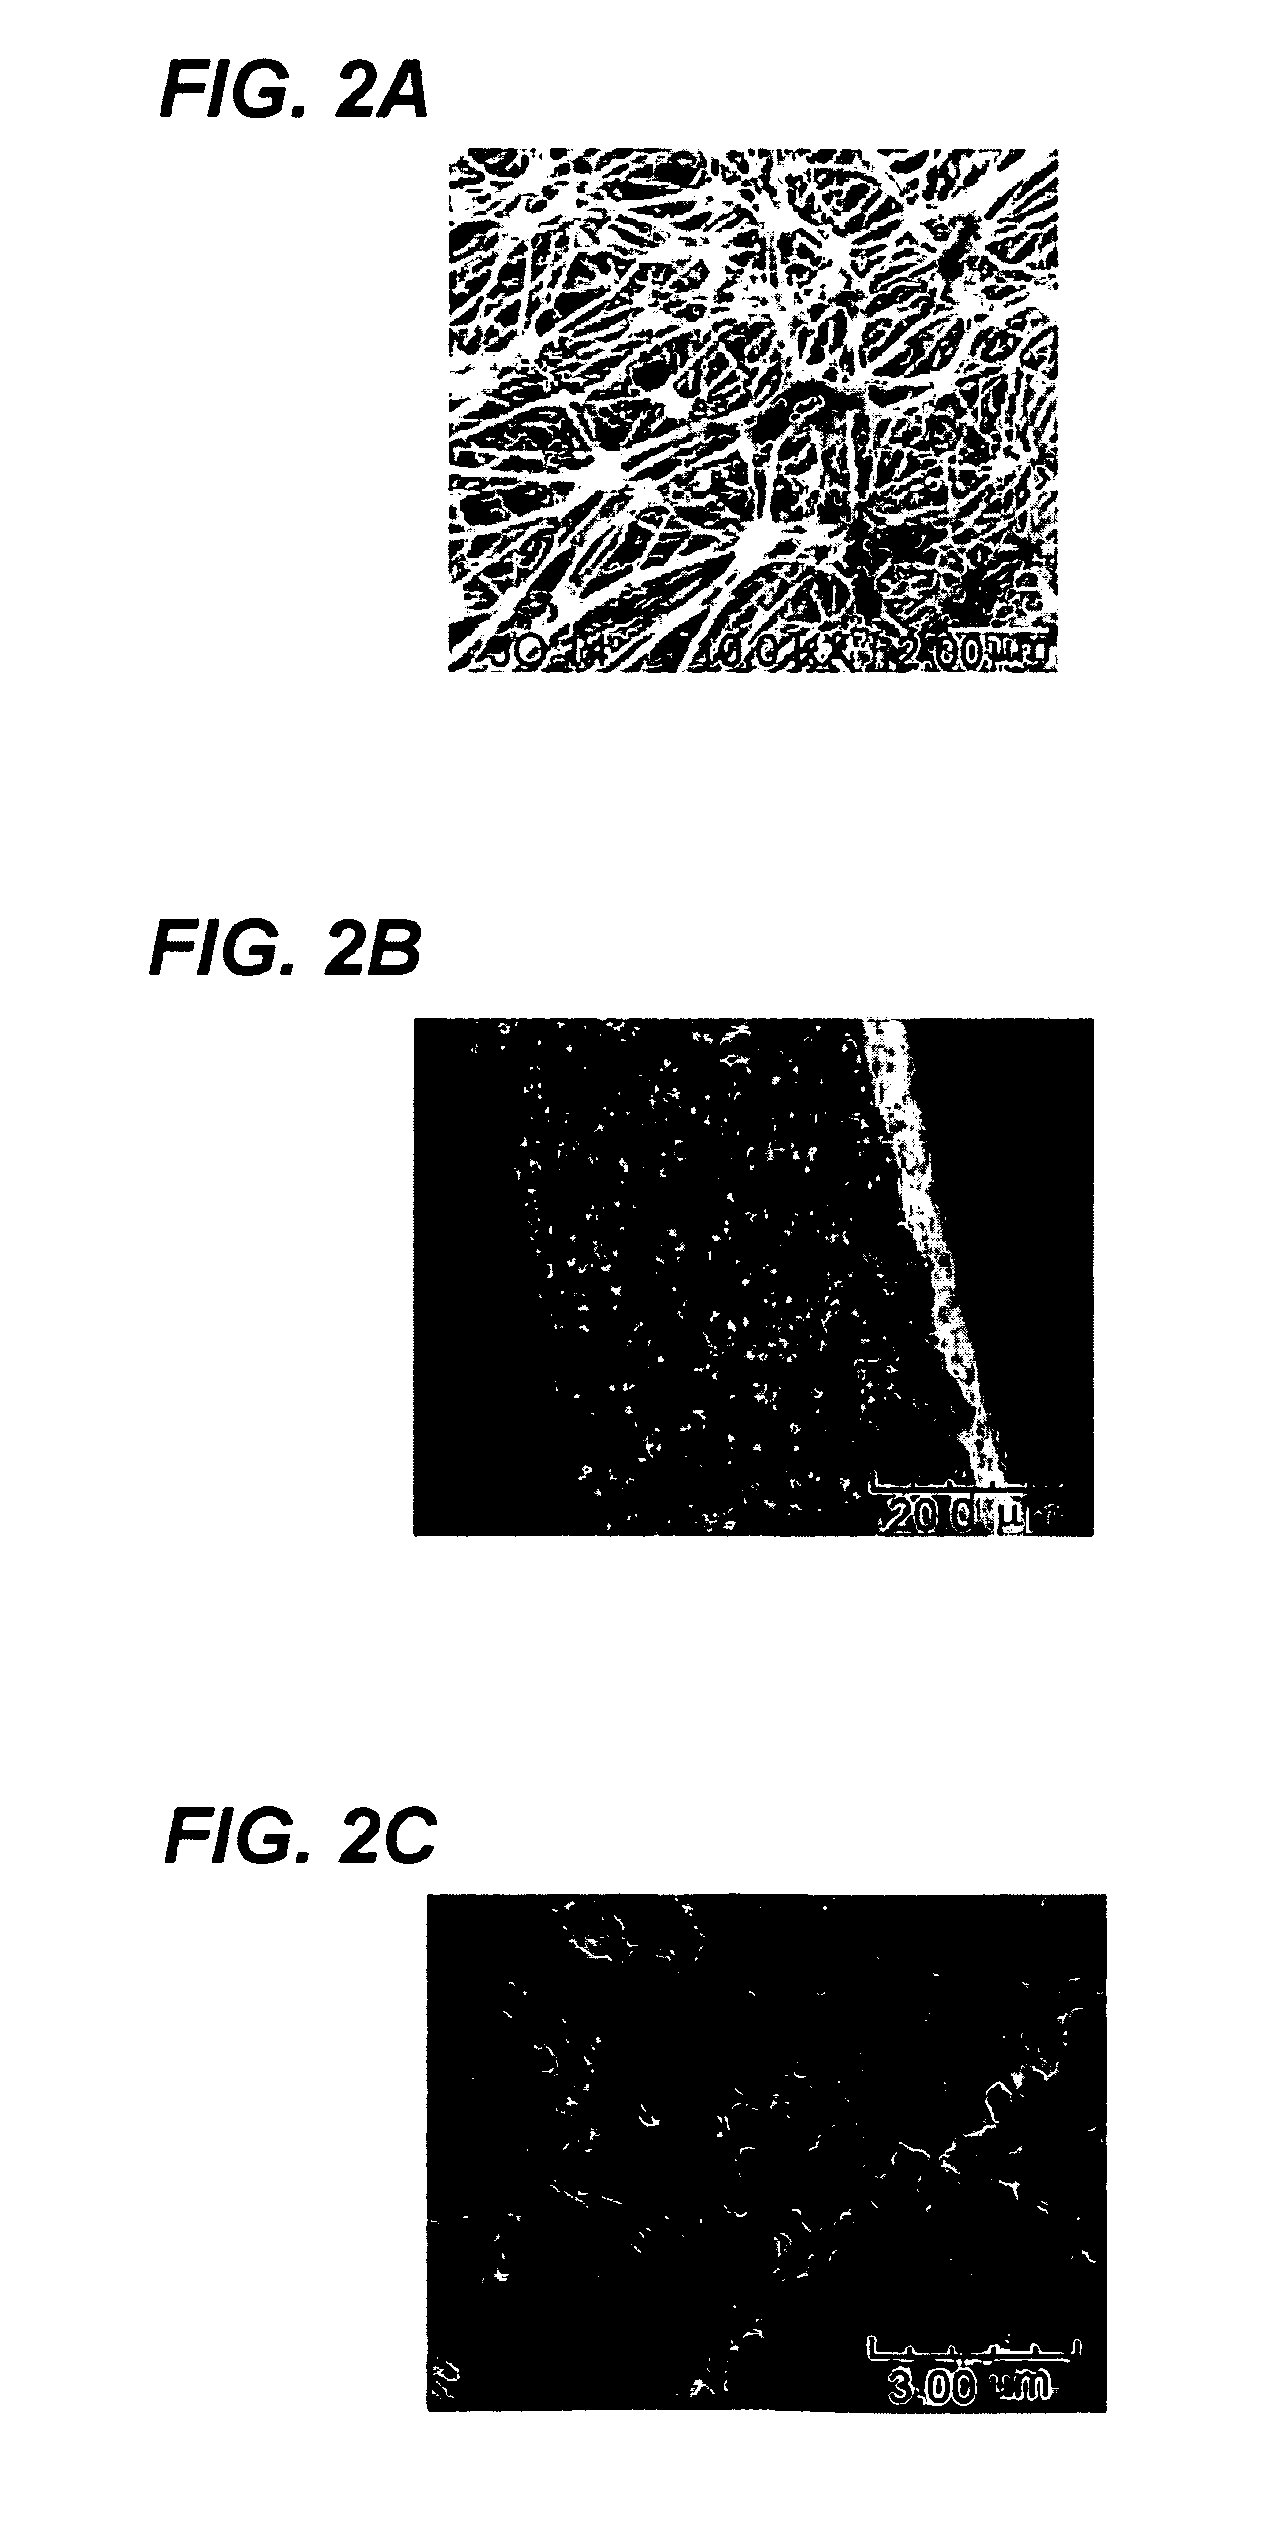 Polyelectrolyte membranes and methods for making